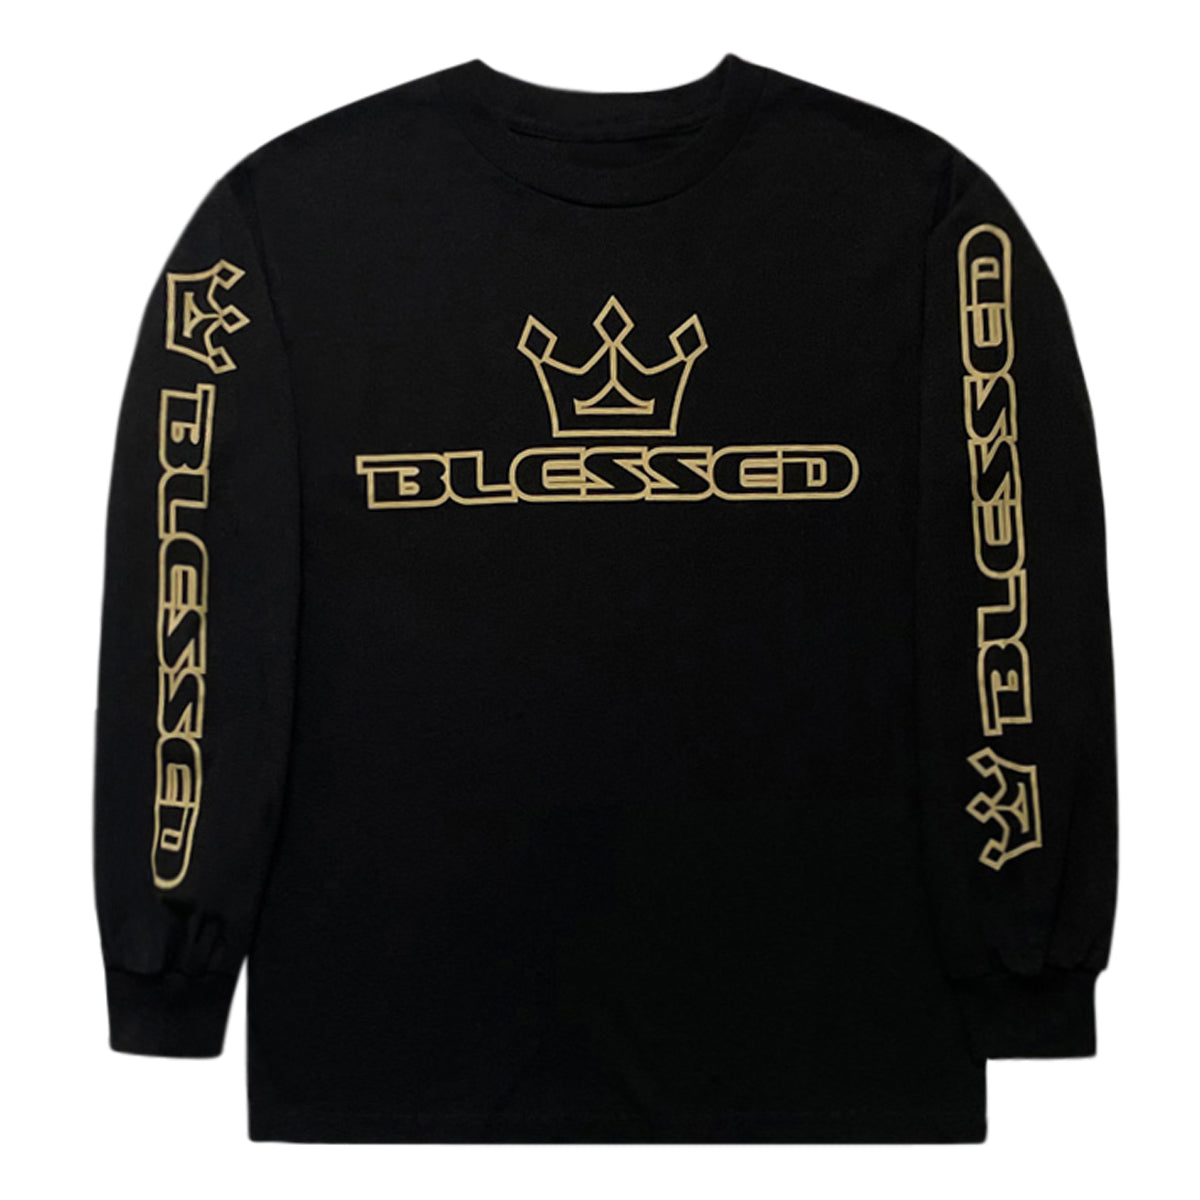 Blessed Cotton Longsleeve Tee